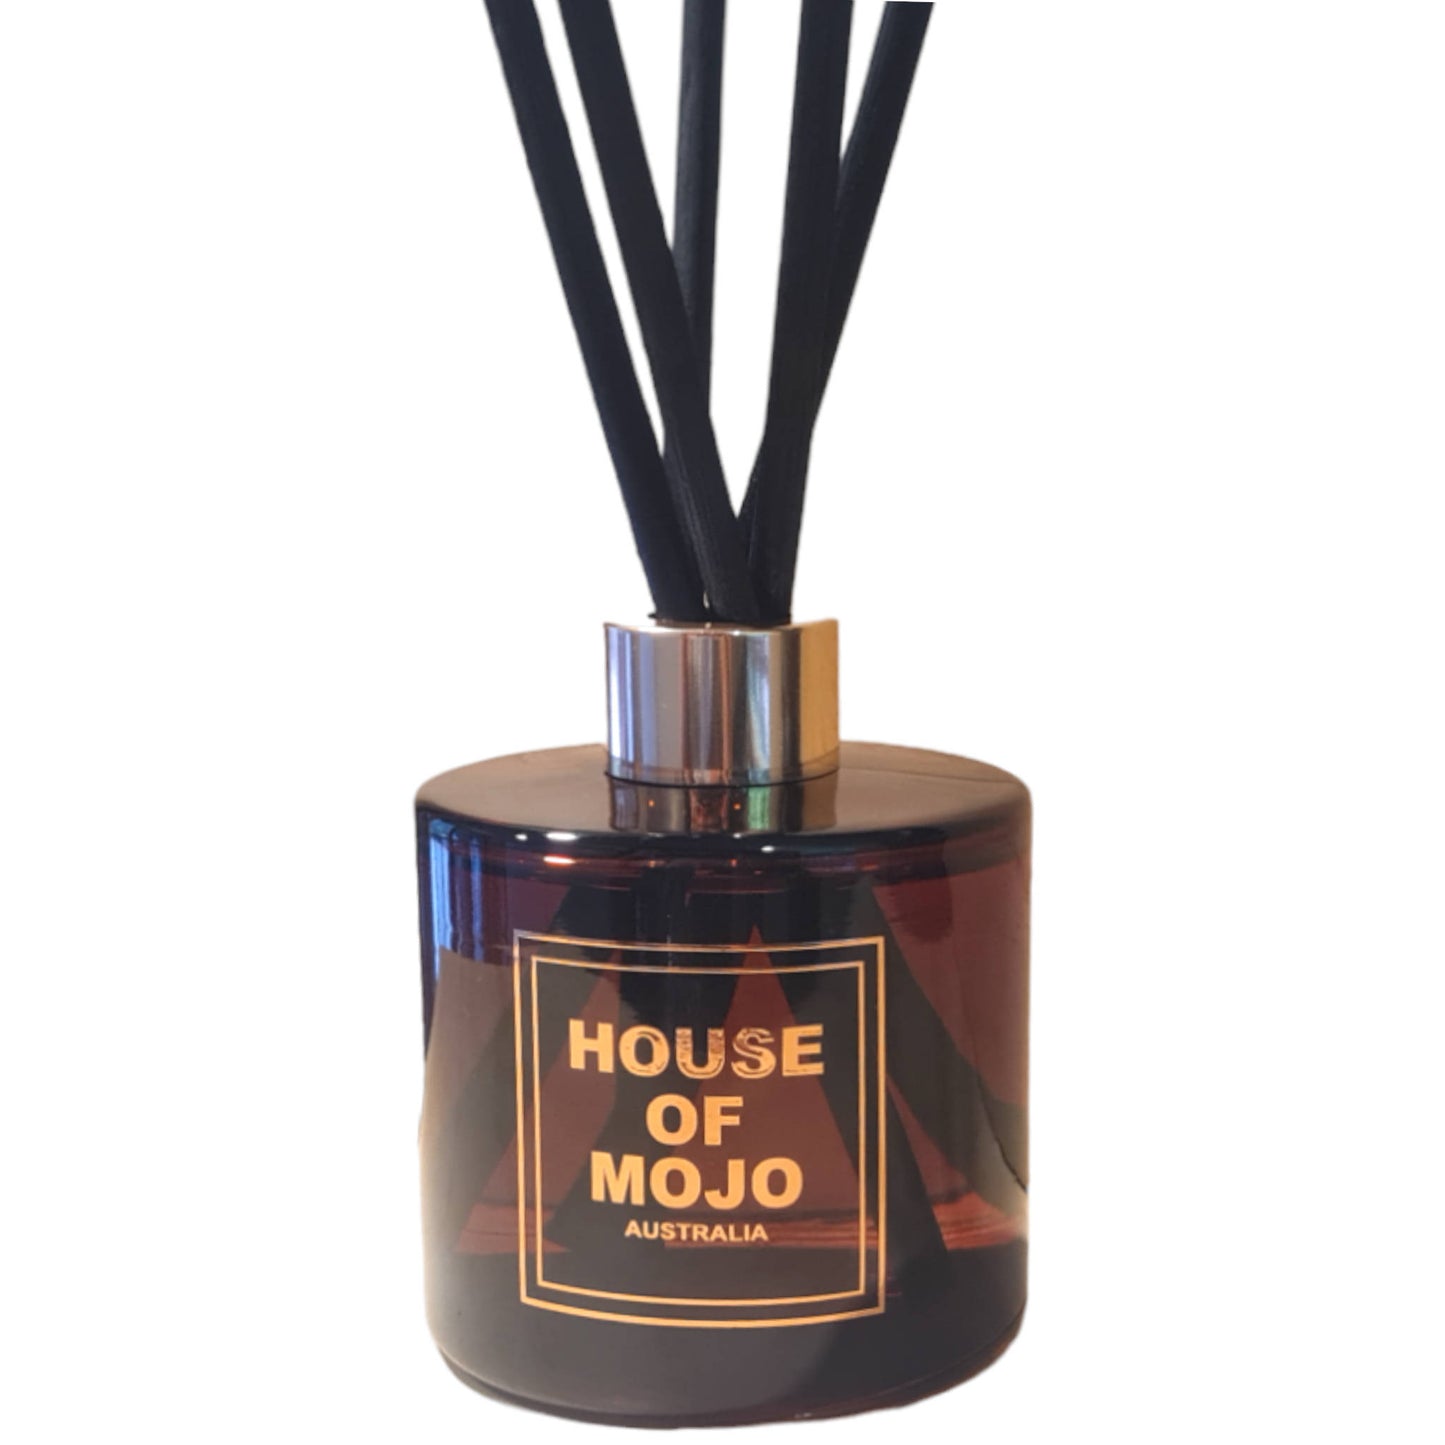 Deluxe Reed Aroma Diffuser - Mojo's Pineapple & Coconut with Cinnamon & Cloves